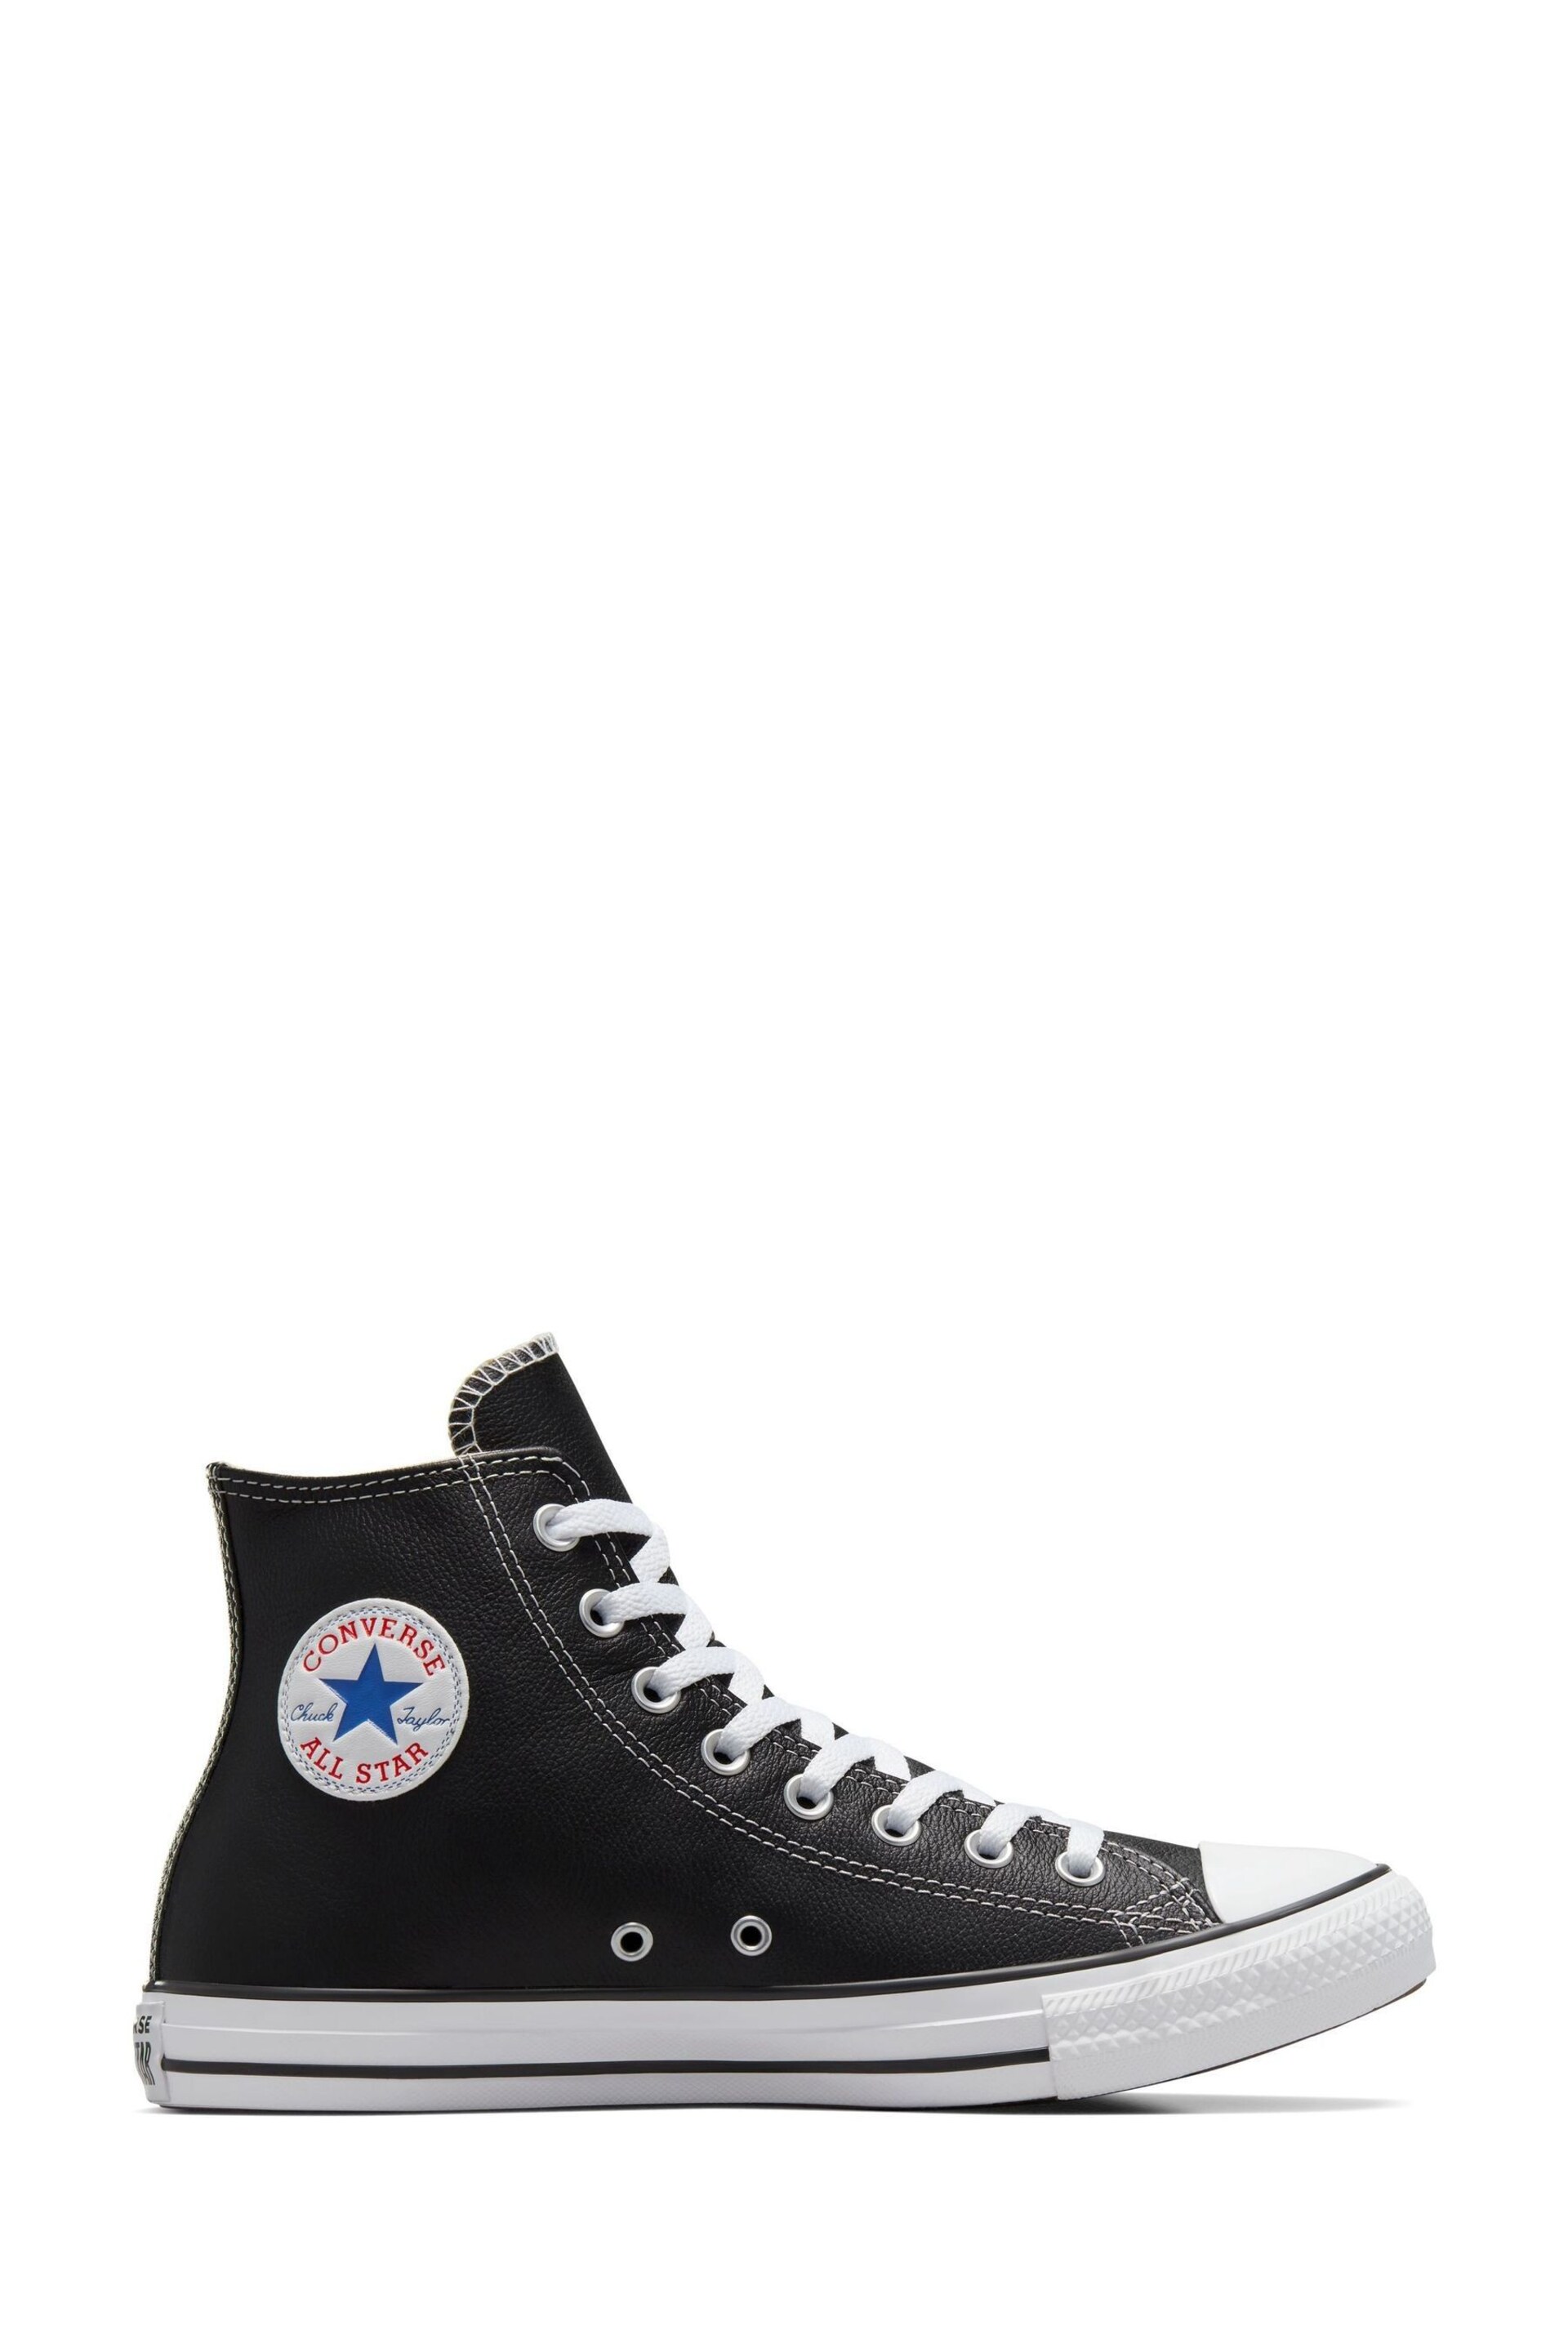 Converse Black Leather Chuck Taylor All Star High Top Trainers - Image 4 of 11